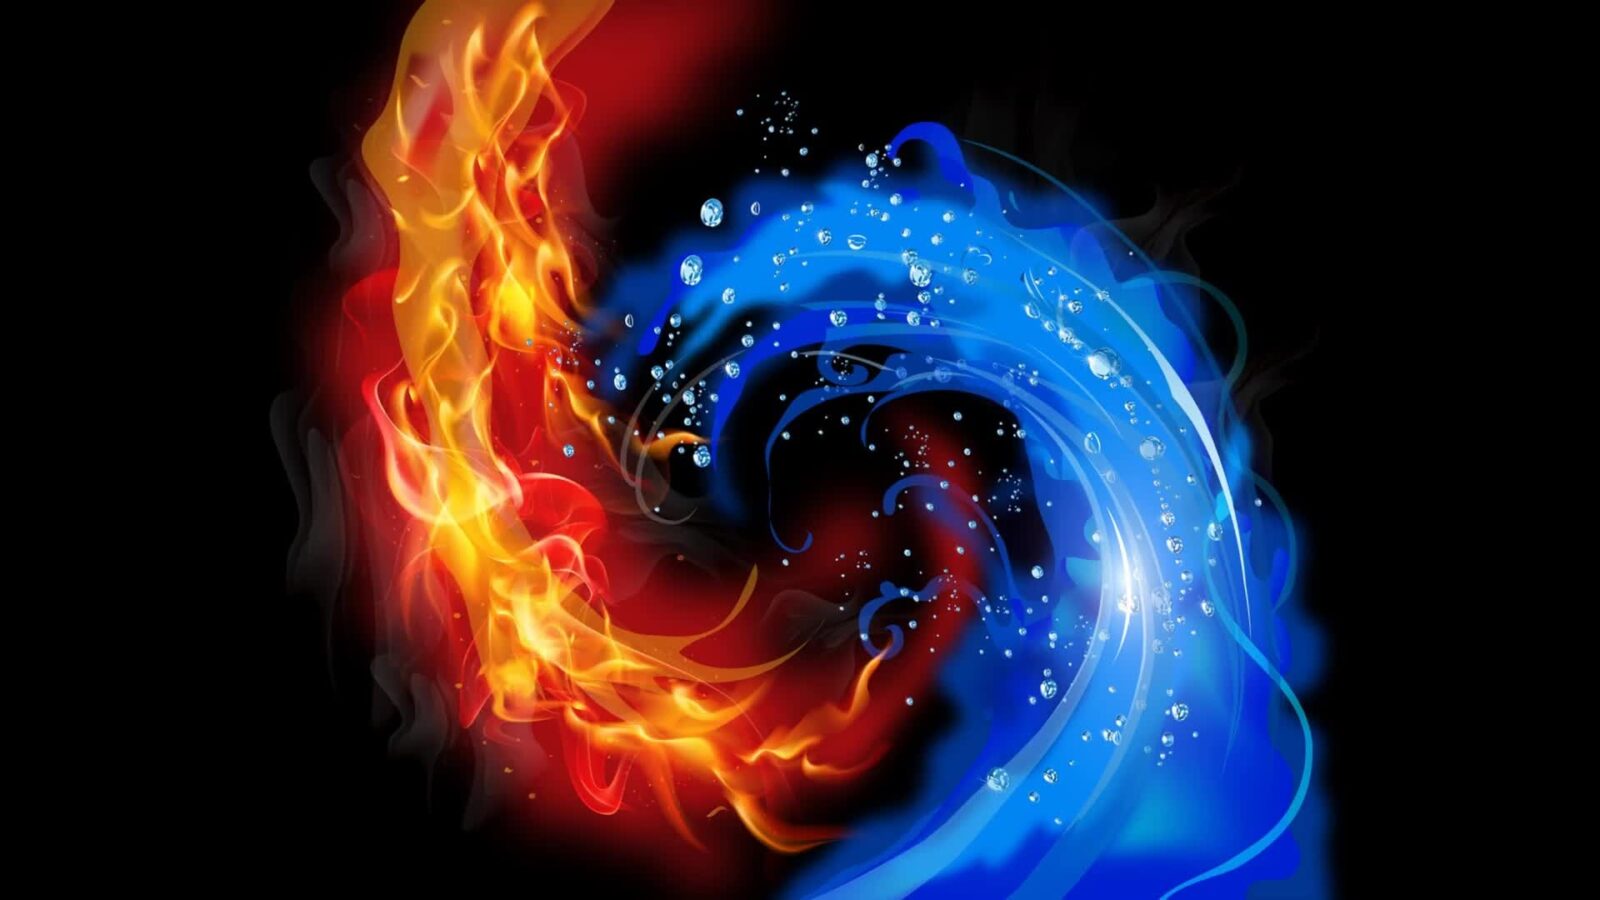 Water And Flame Fantasy Background - Free Live Wallpaper - Live Desktop